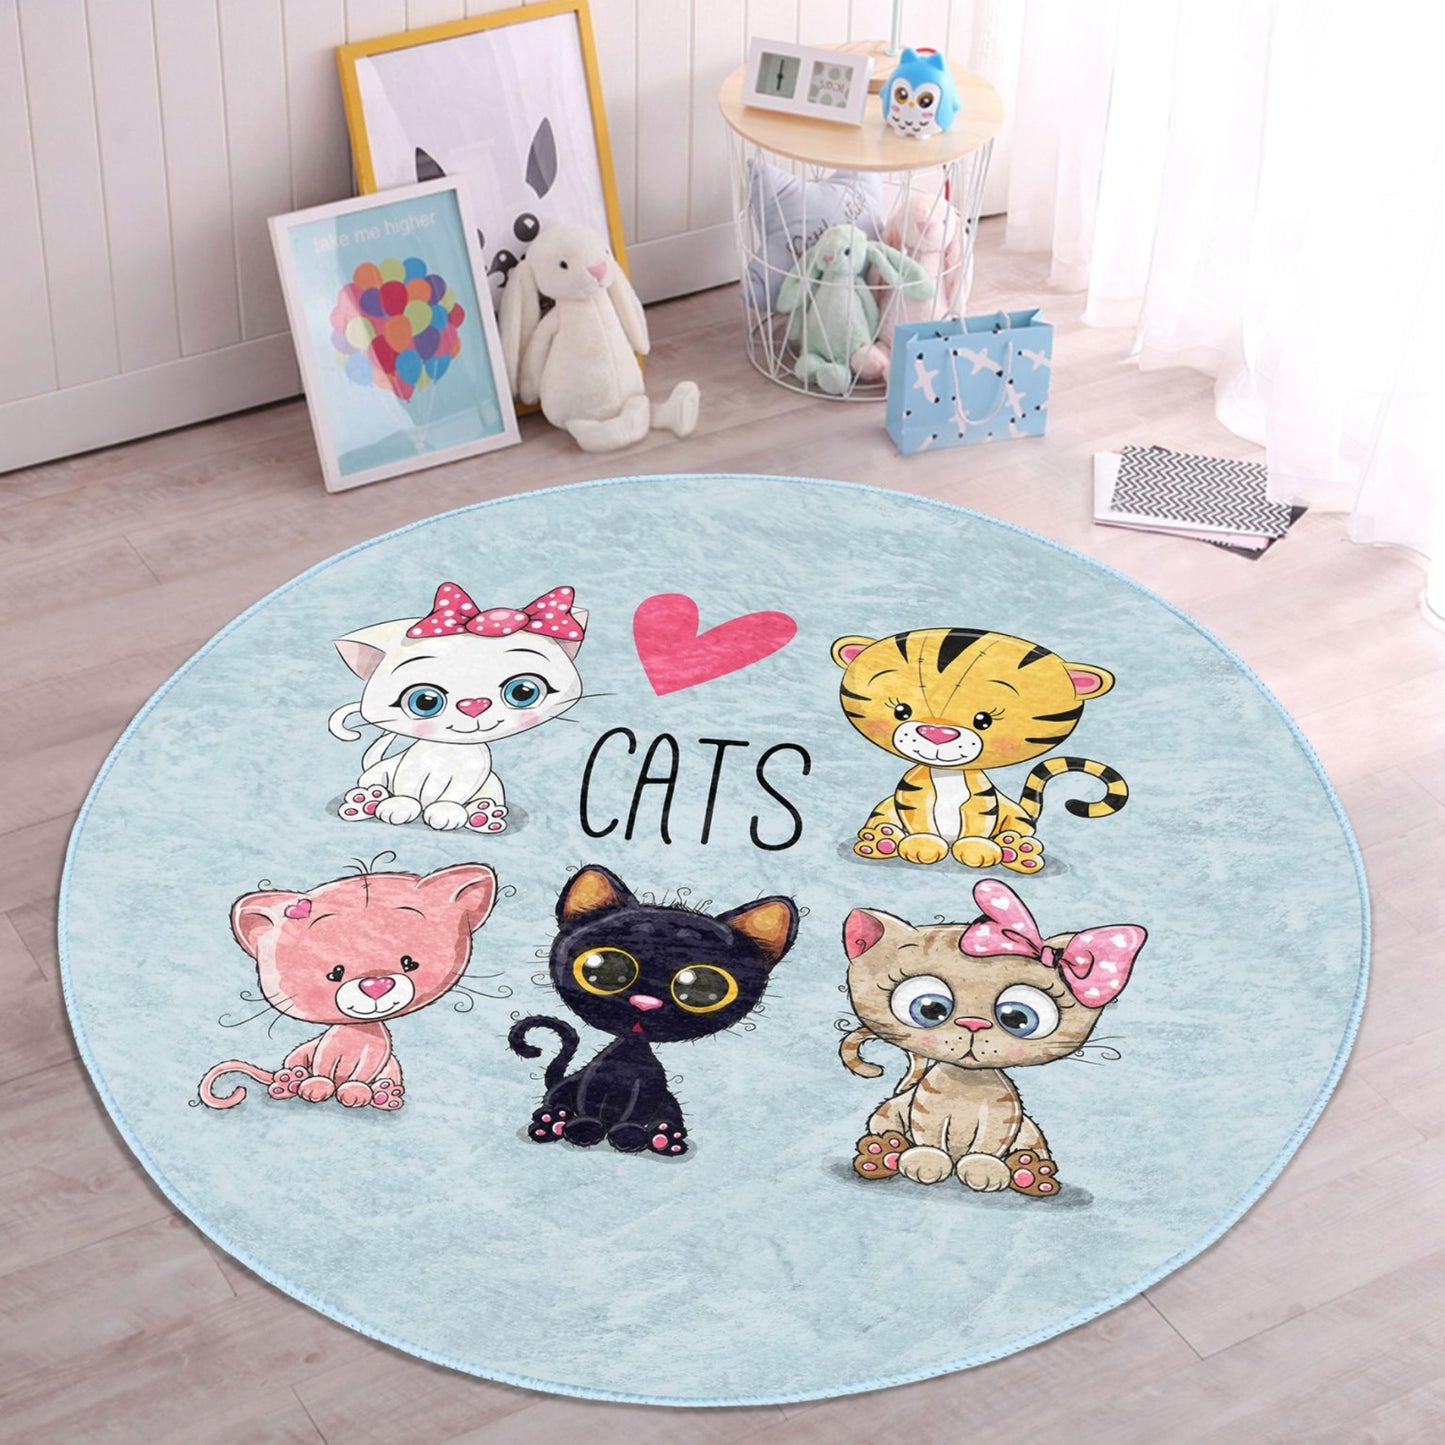 Washable Rug with Kitty Motif - Easy Maintenance